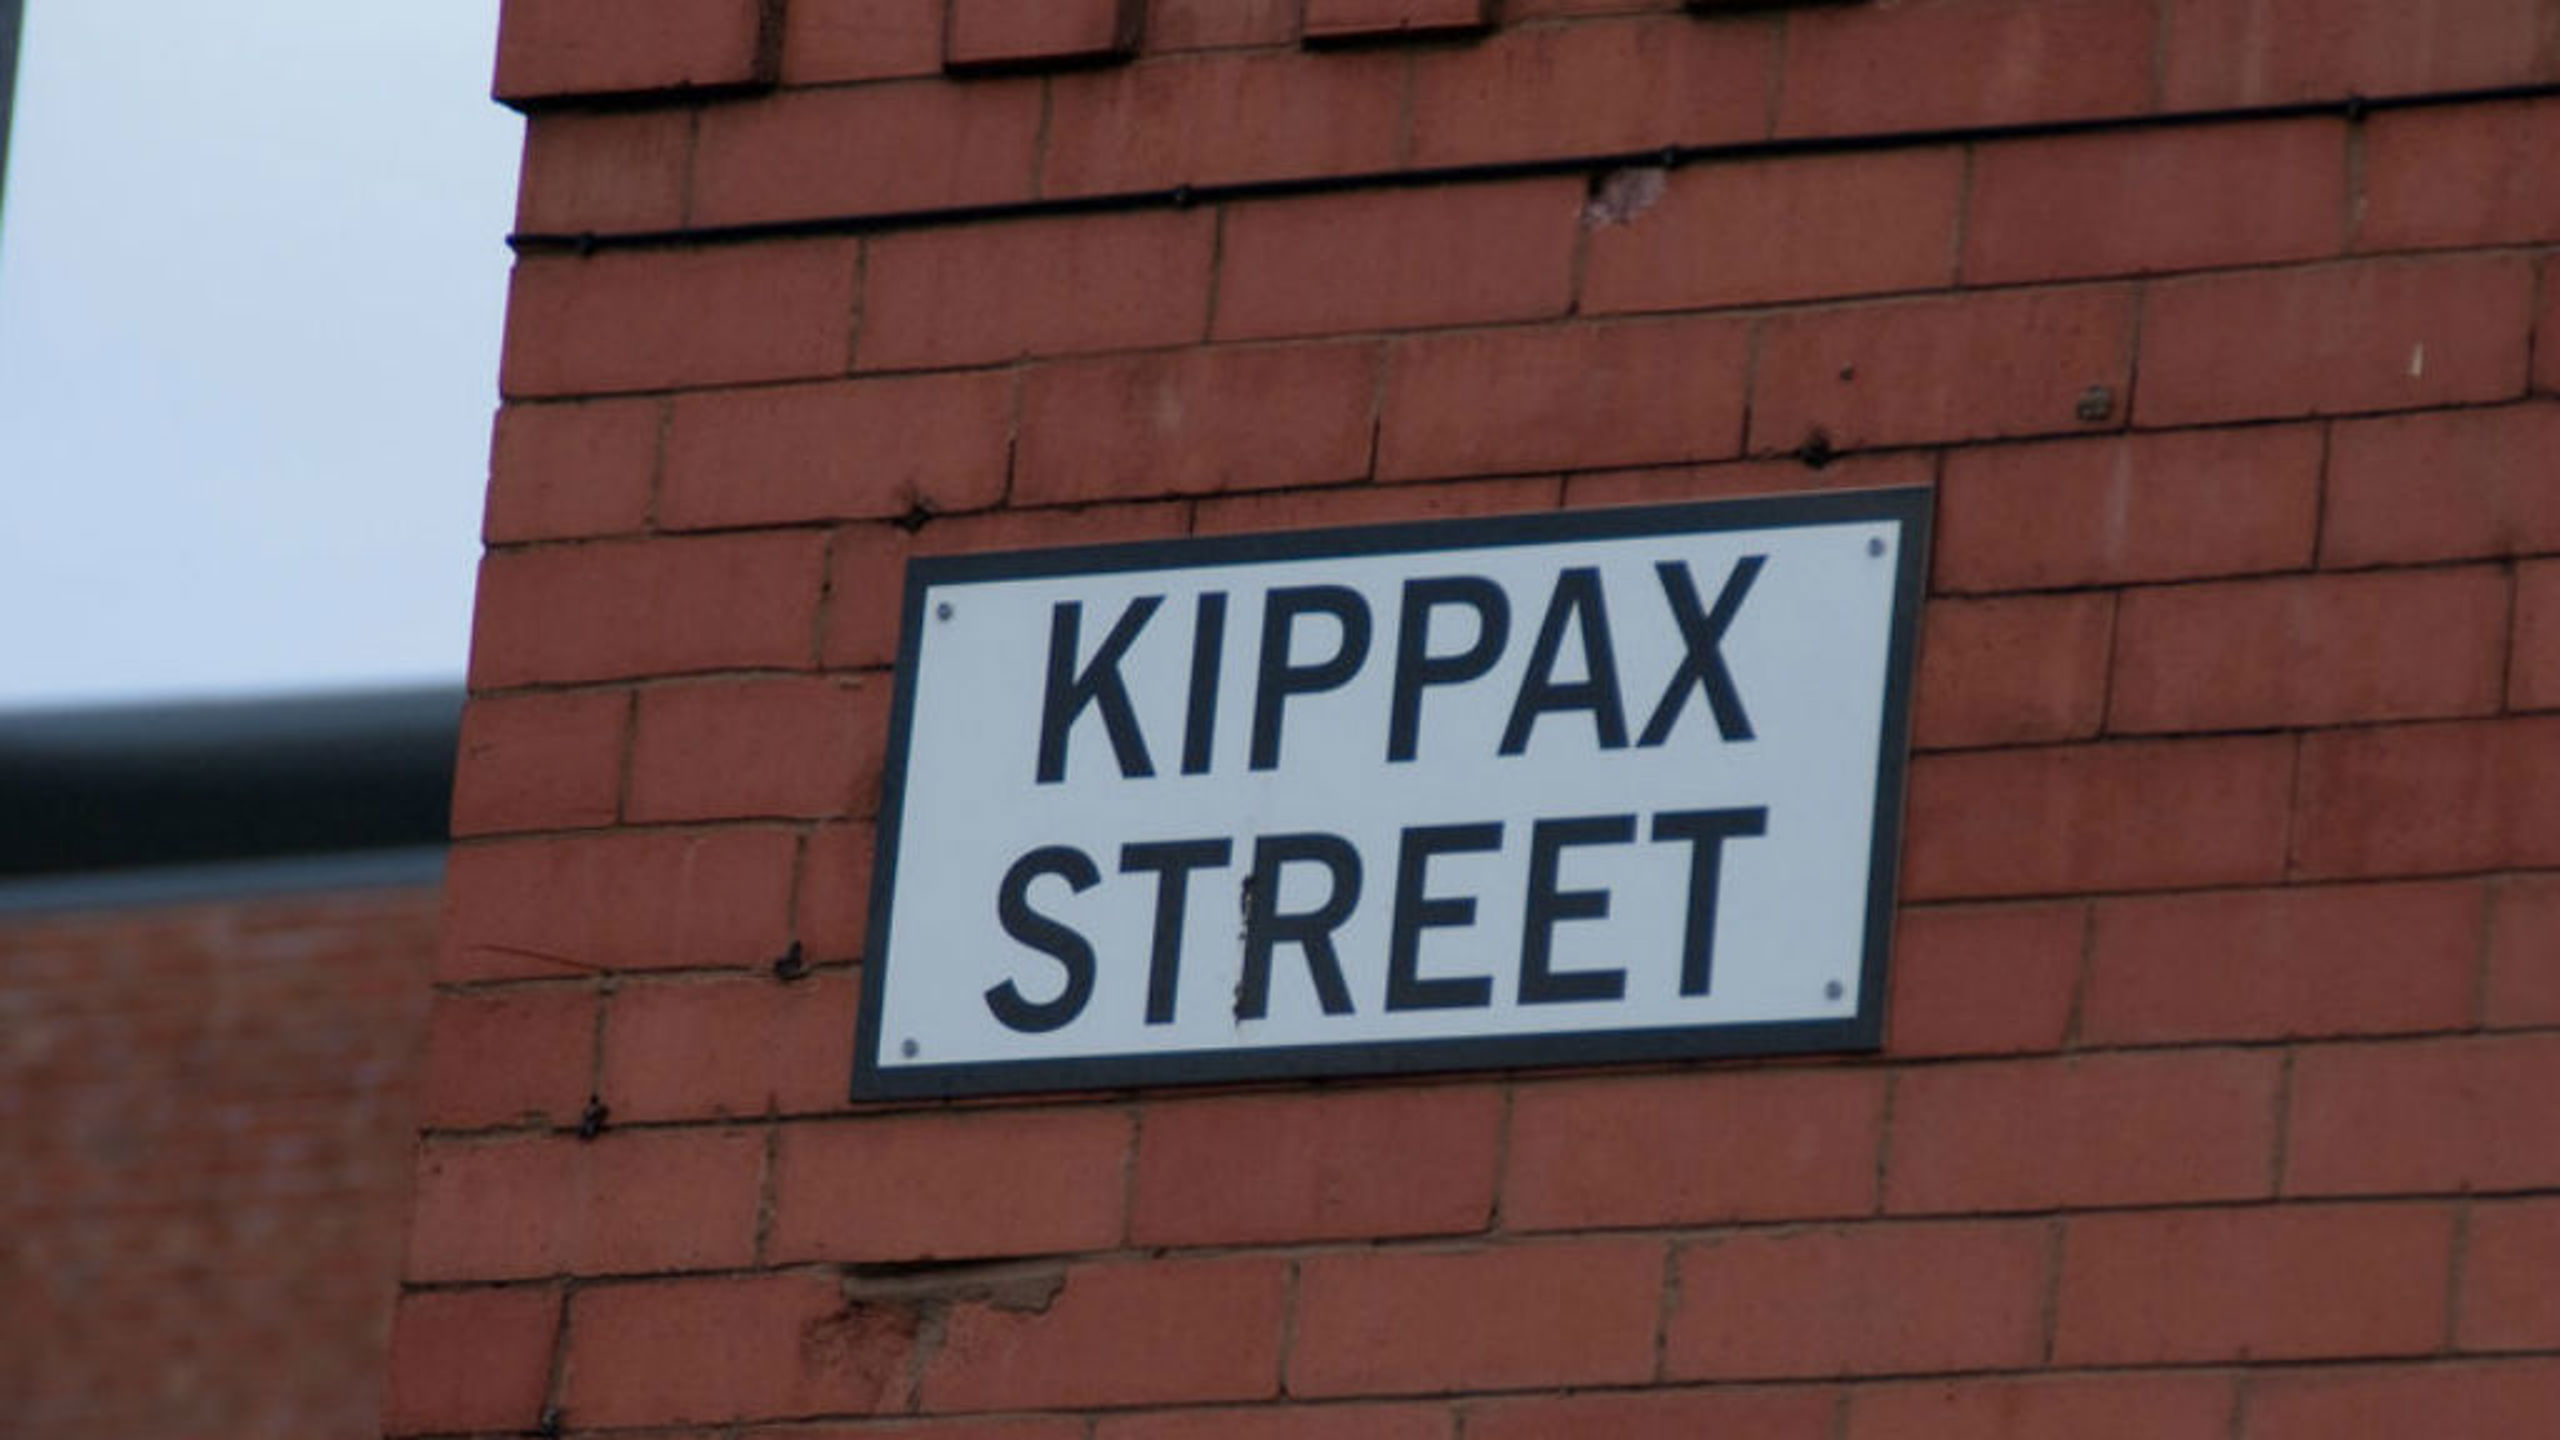 Gallery: Remembering the Kippax